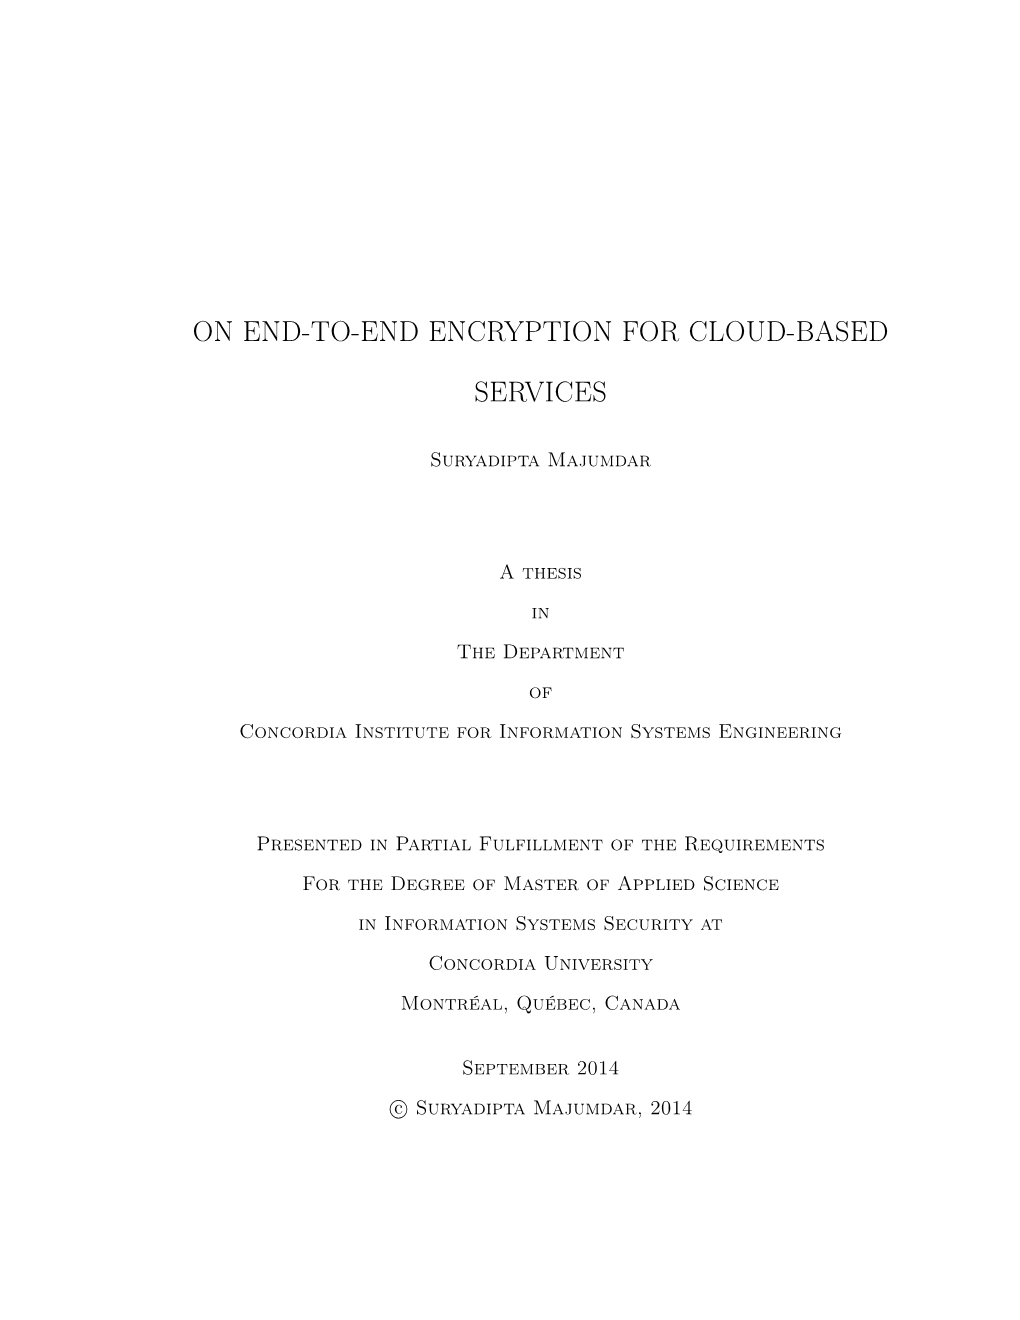 On End-To-End Encryption for Cloud-Based Services and Submitted in Partial Fulﬁllment of the Requirements for the Degree Of